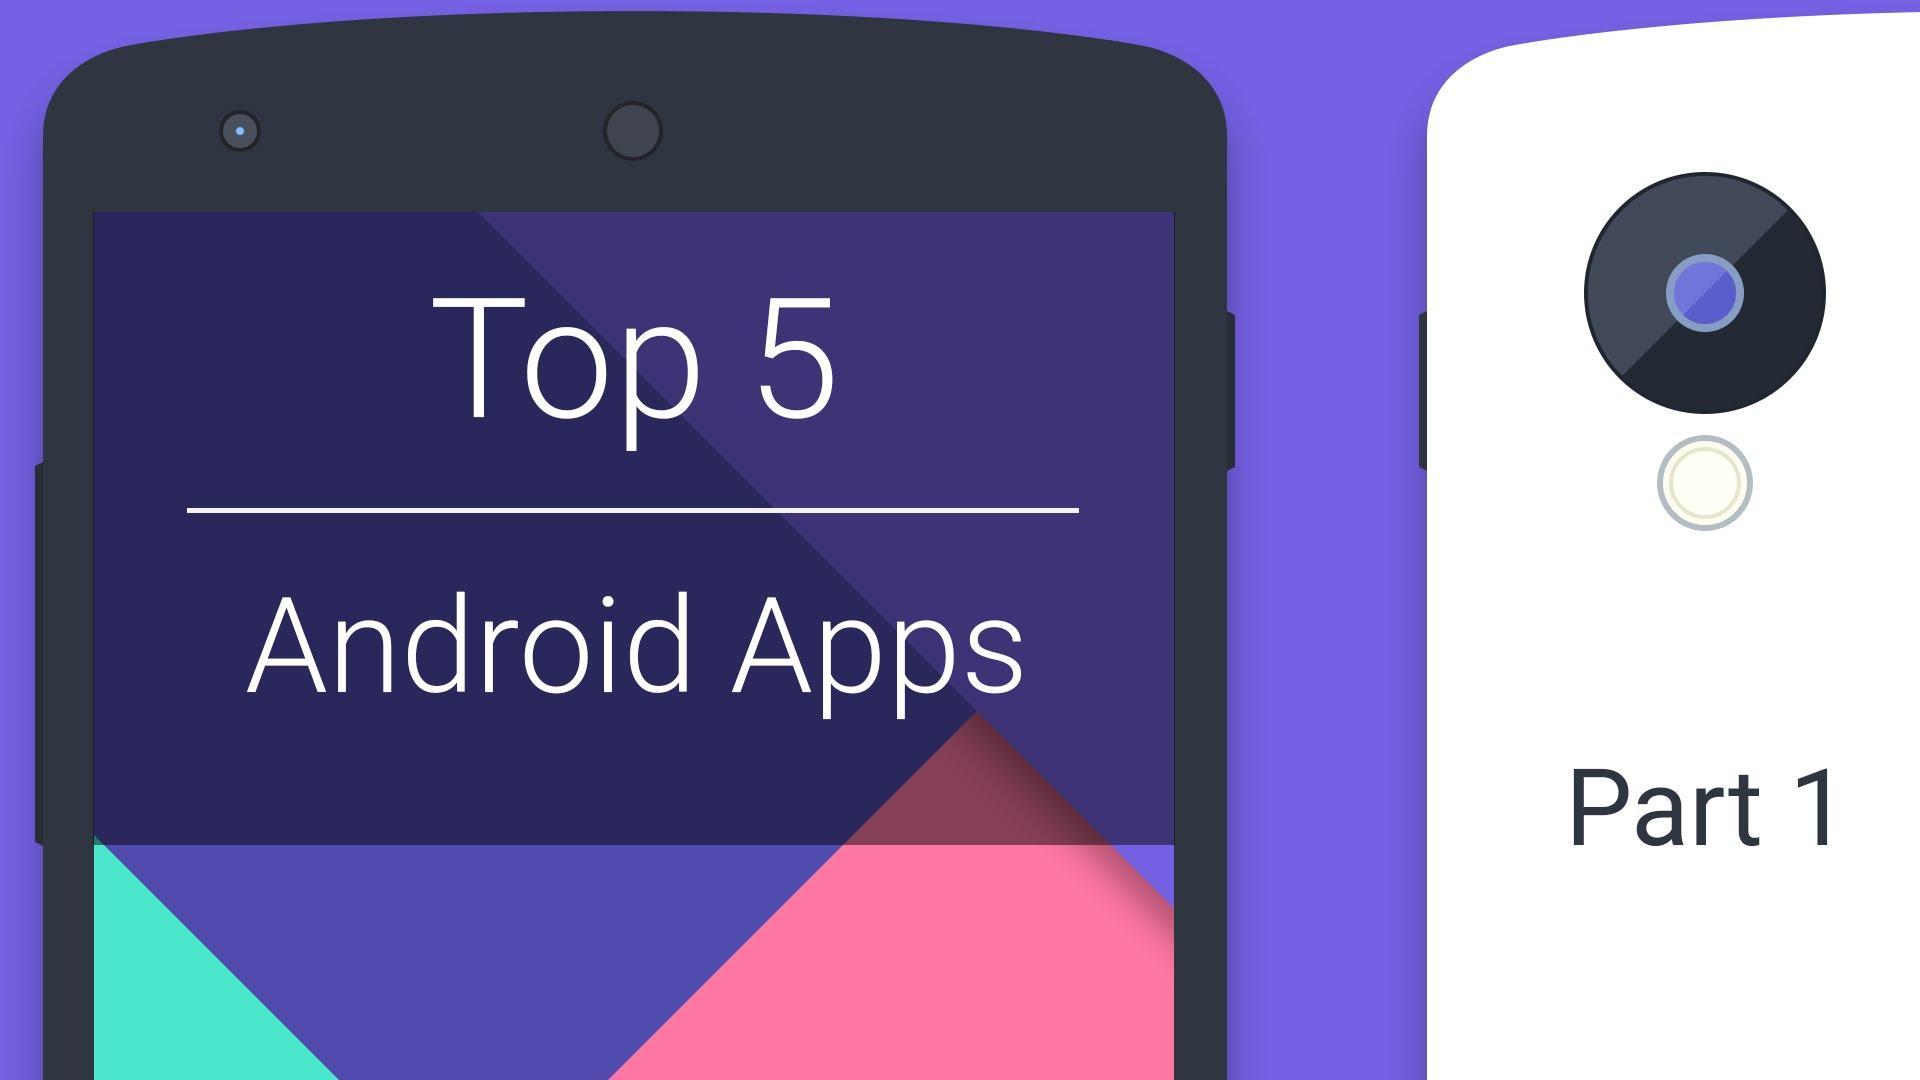 Топ 5 андроидов. Android Top app. 5 Apps. Top 5 apps. Https top androidd